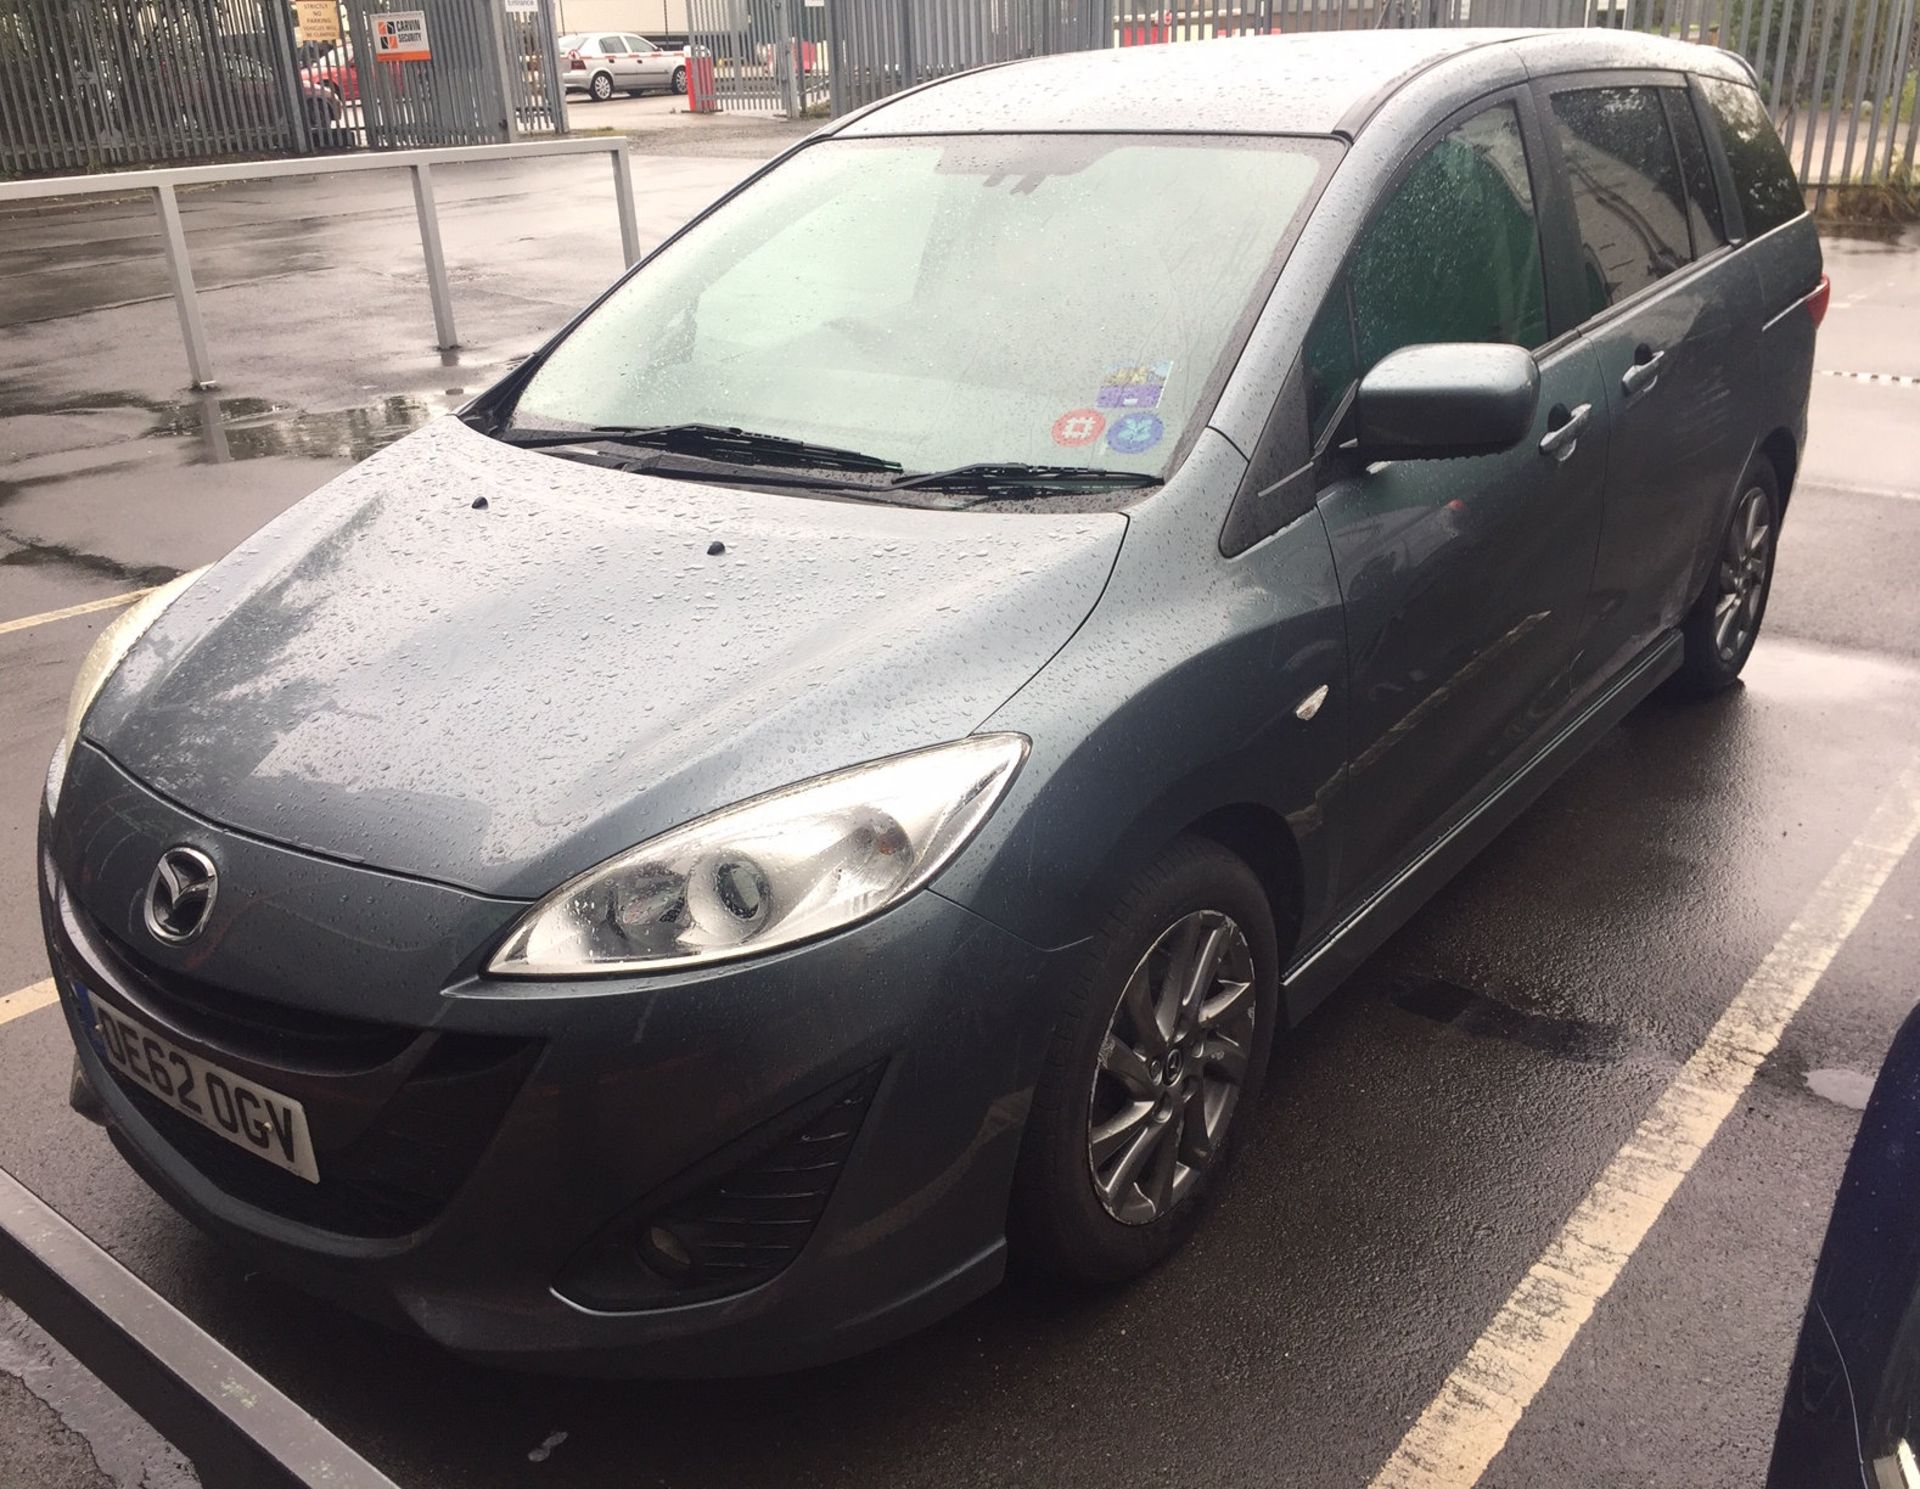 2013 Mazda 5 2.0 Venture Edition 5 Dr MPV - CL505 - NO VAT ON THE HAMMER - Location: Corby, N - Image 14 of 18